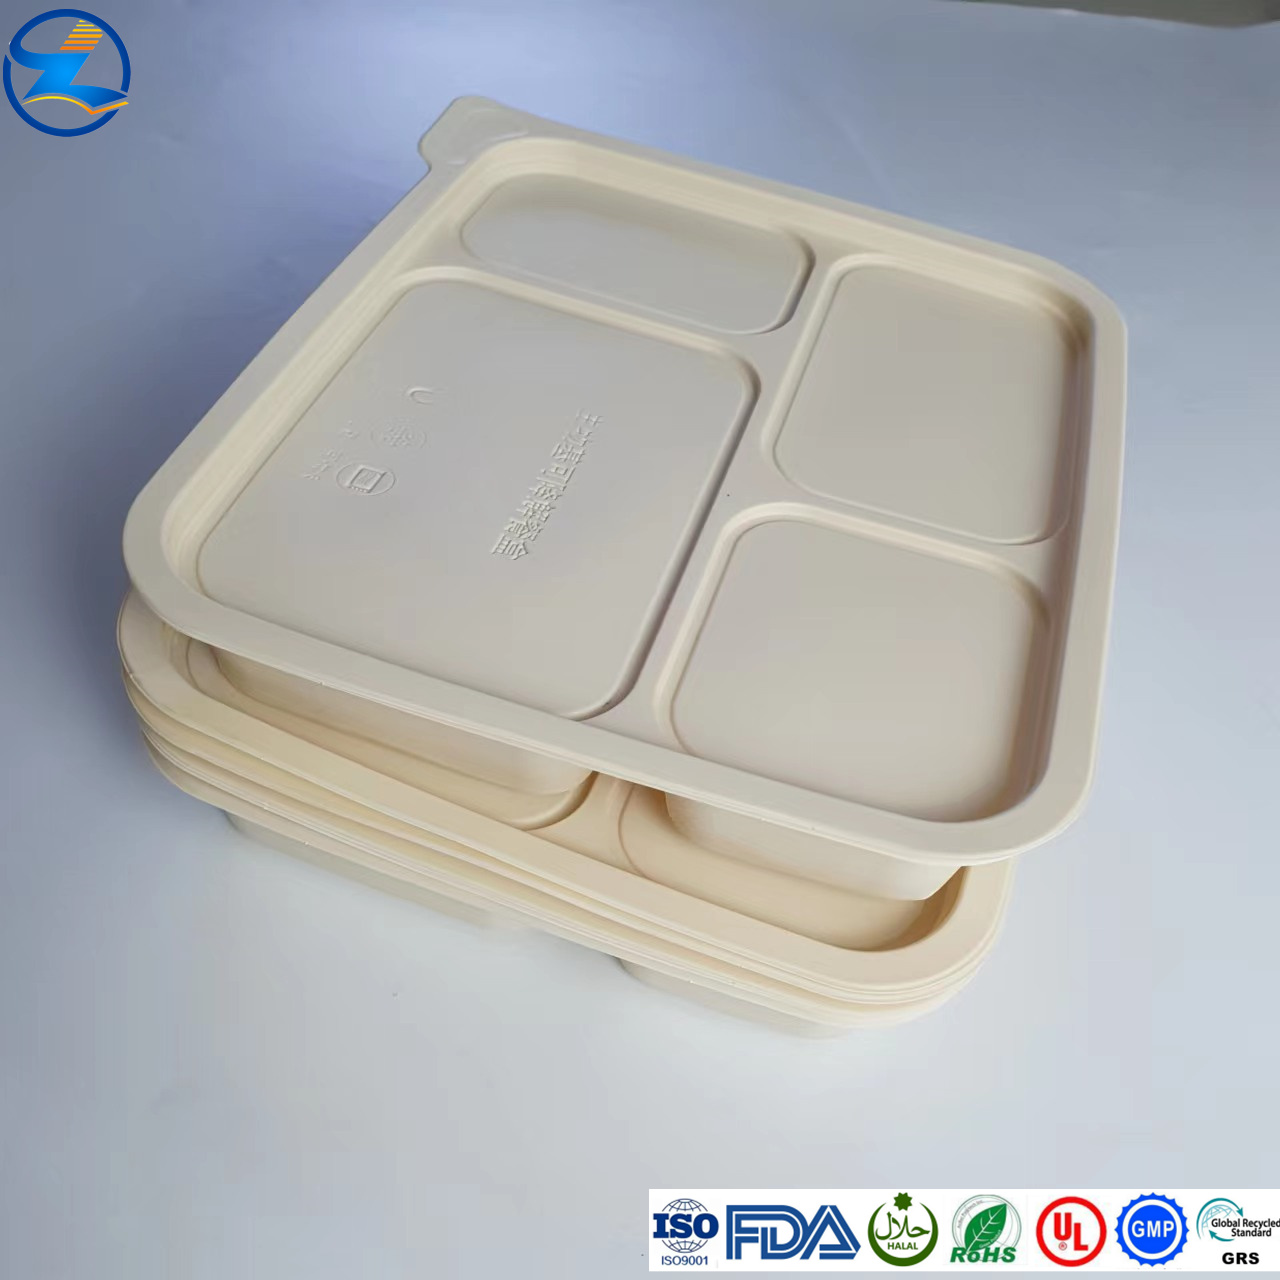 100% Biodegradable Thermoplastic PLA Food Containe